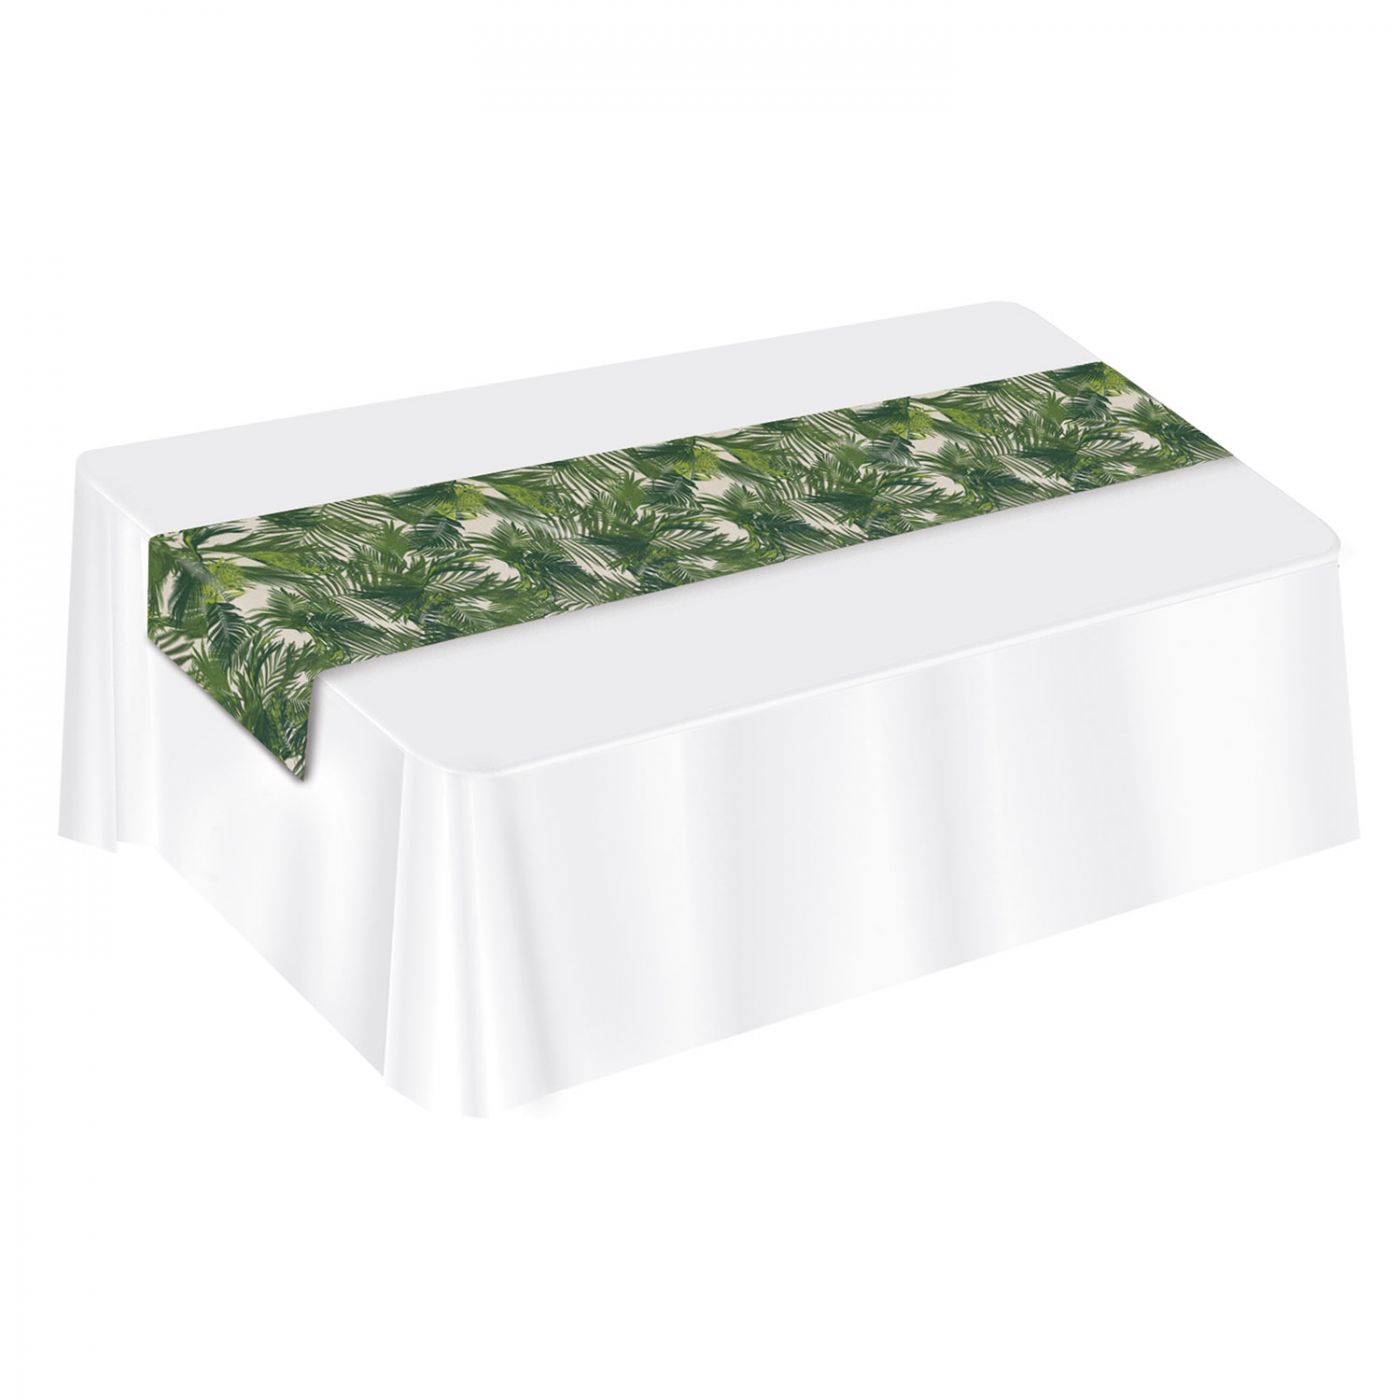 Palm Leaf Fabric Table Runner (12) image